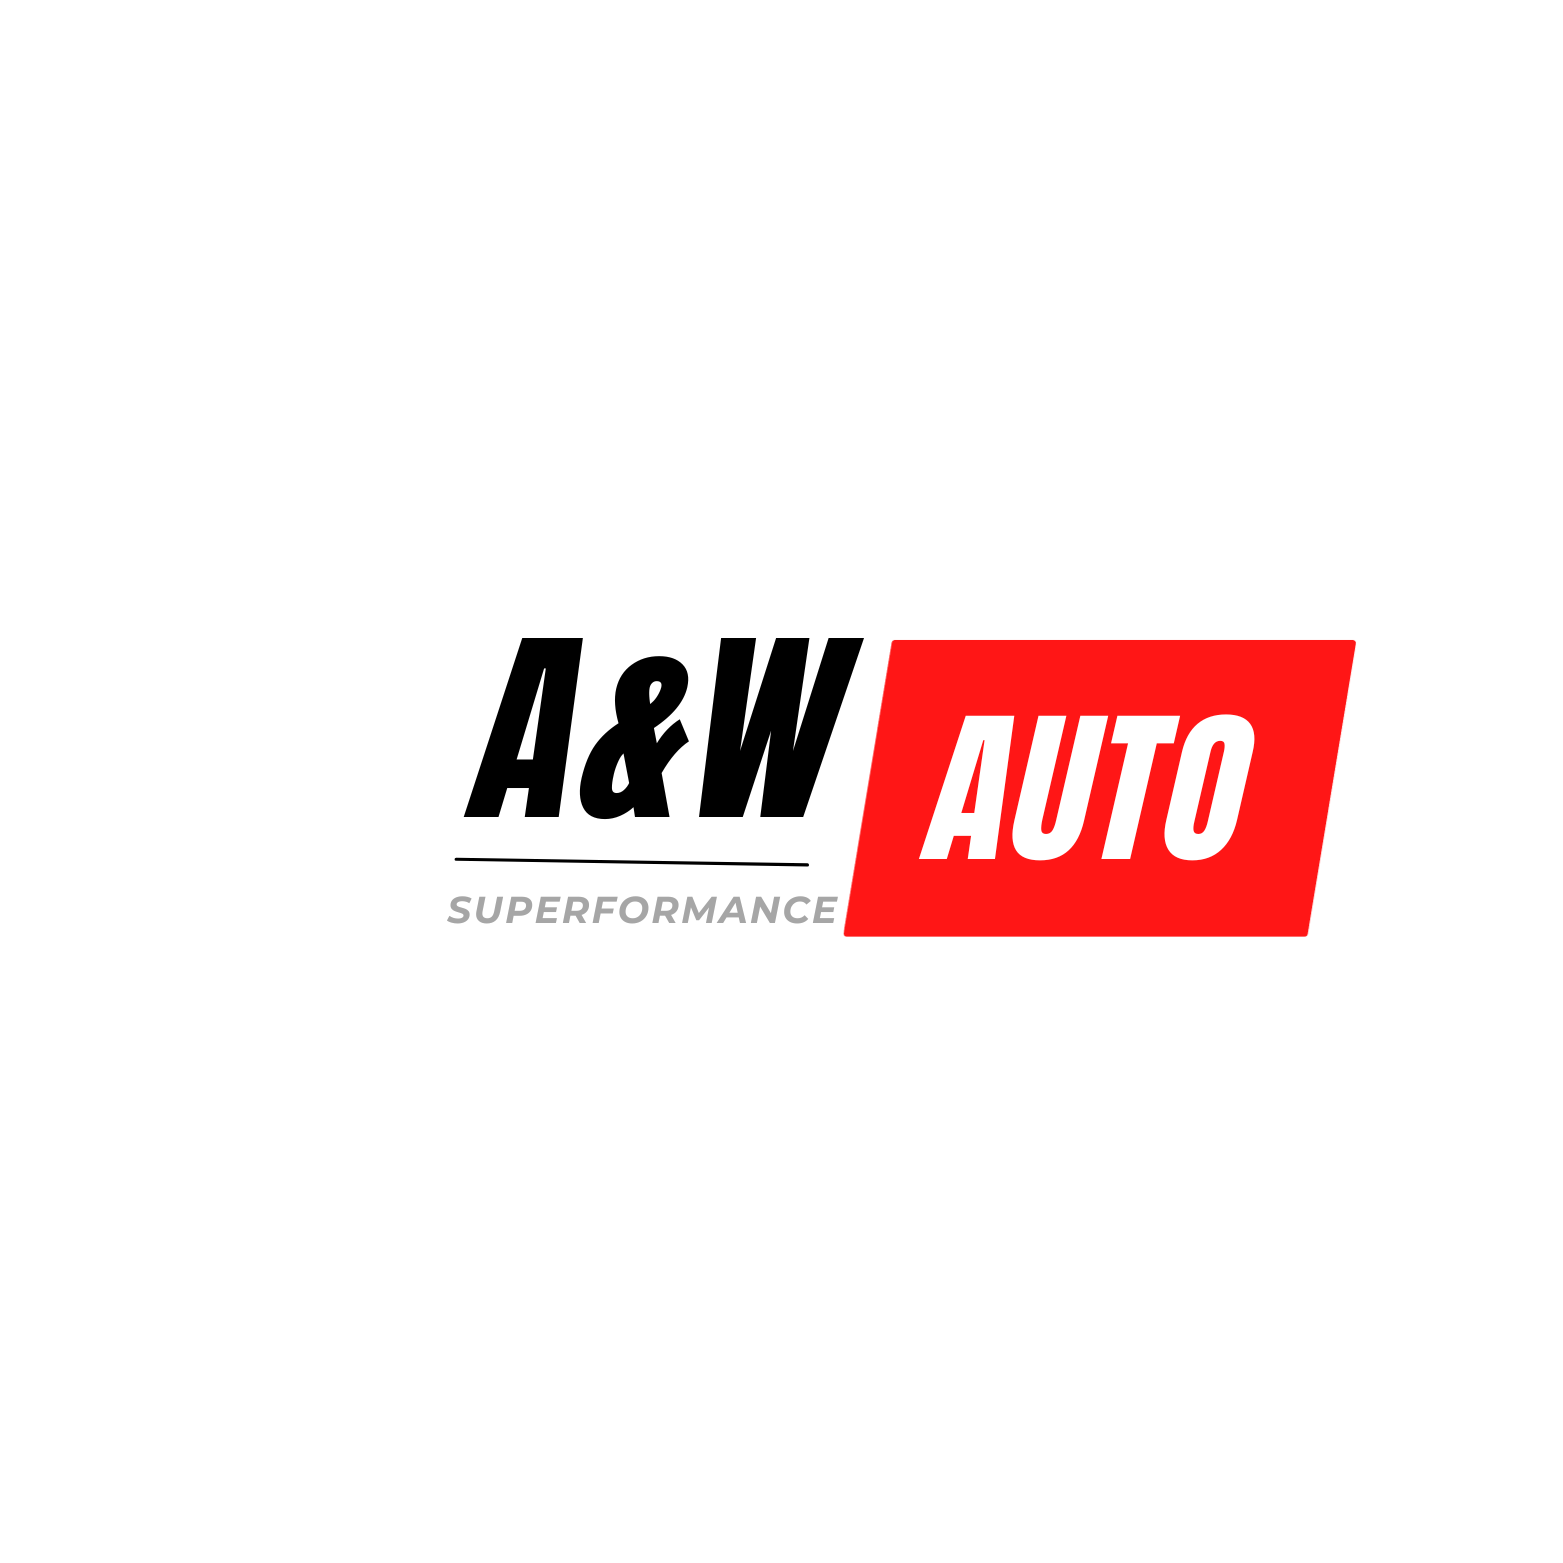 Top 5 Reasons to Choose AW Auto for Your Car Repair Needs